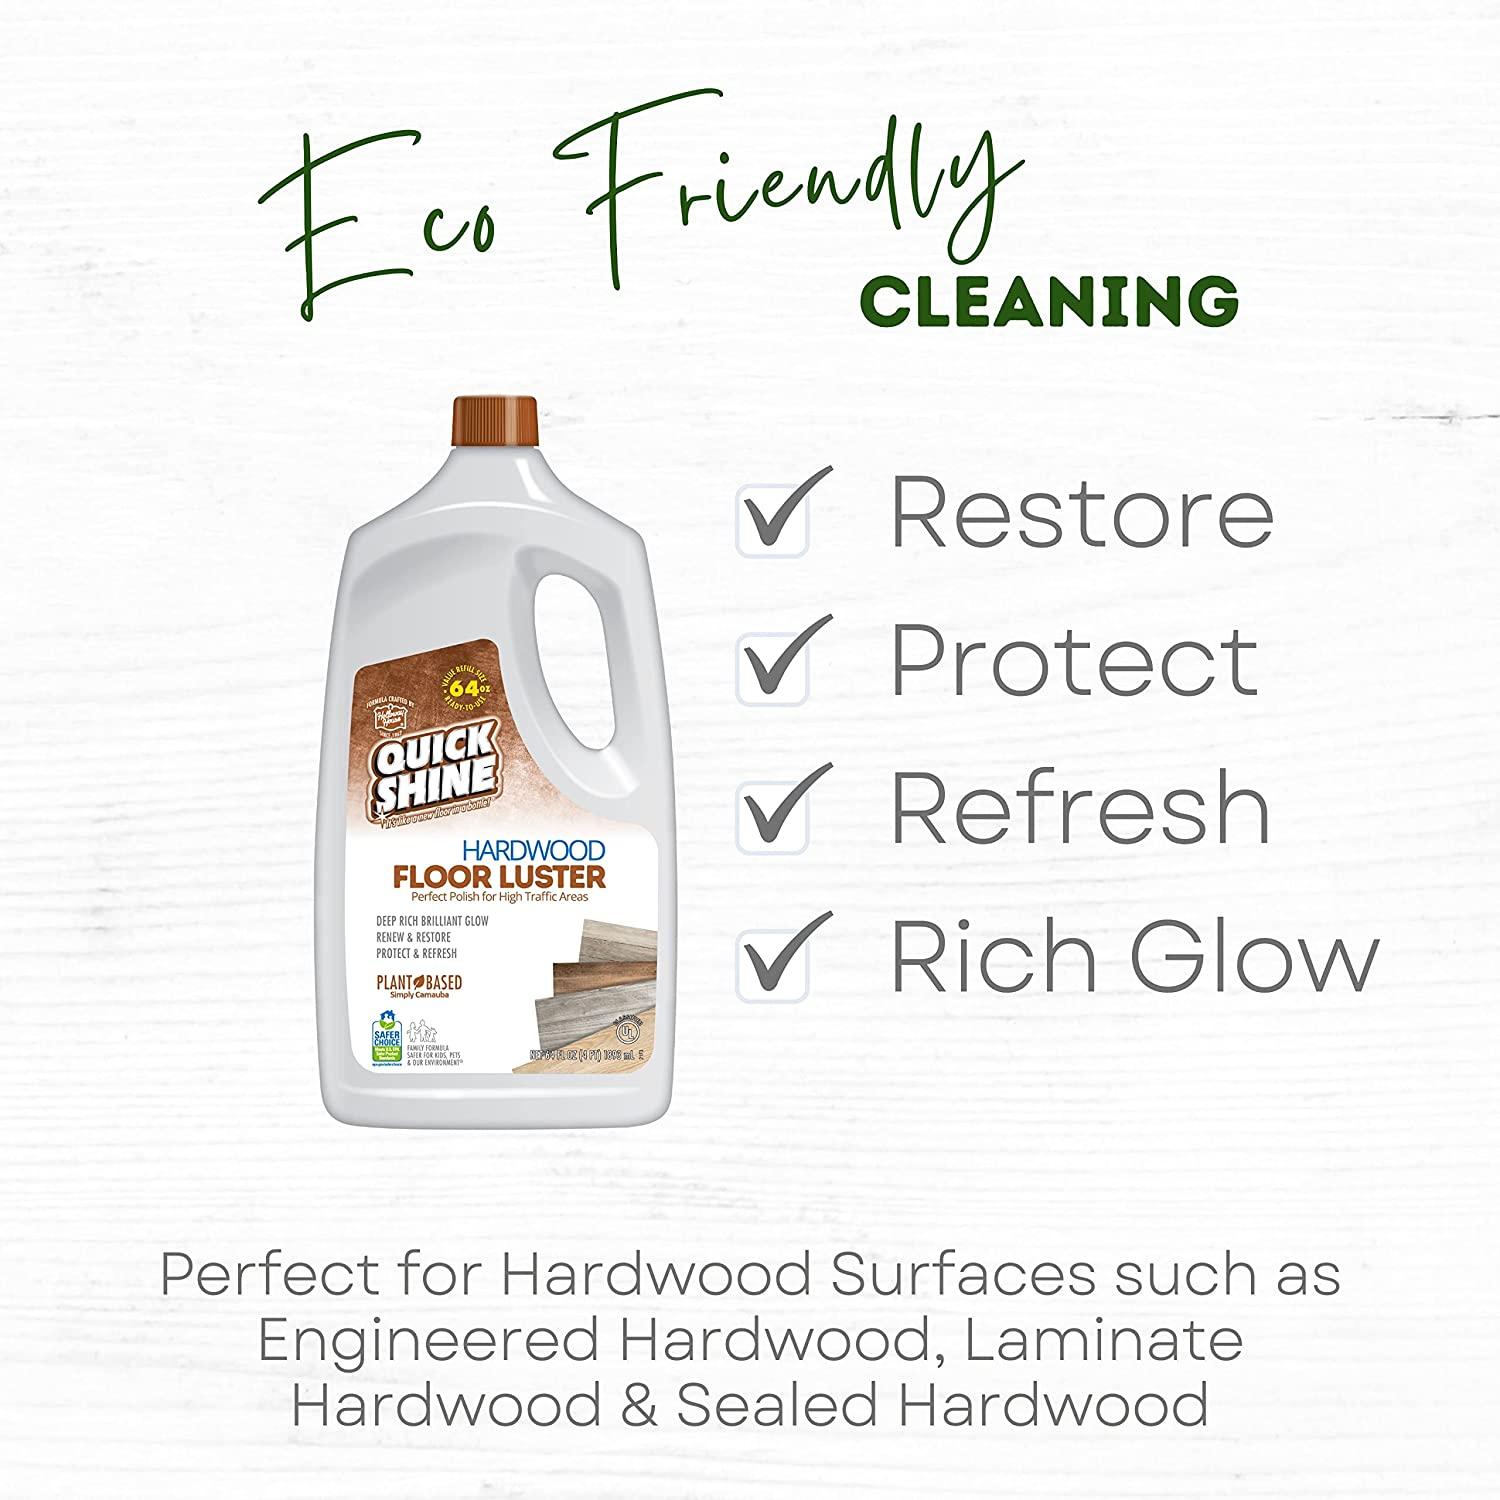 Quick Shine Hardwood Floor Luster 64oz, Plant-Based Cleaner & Polish w  Carnauba, Simply Squirt & Spread, Don't Refinish It, Quick Shine It, Safer Choice Cleaner